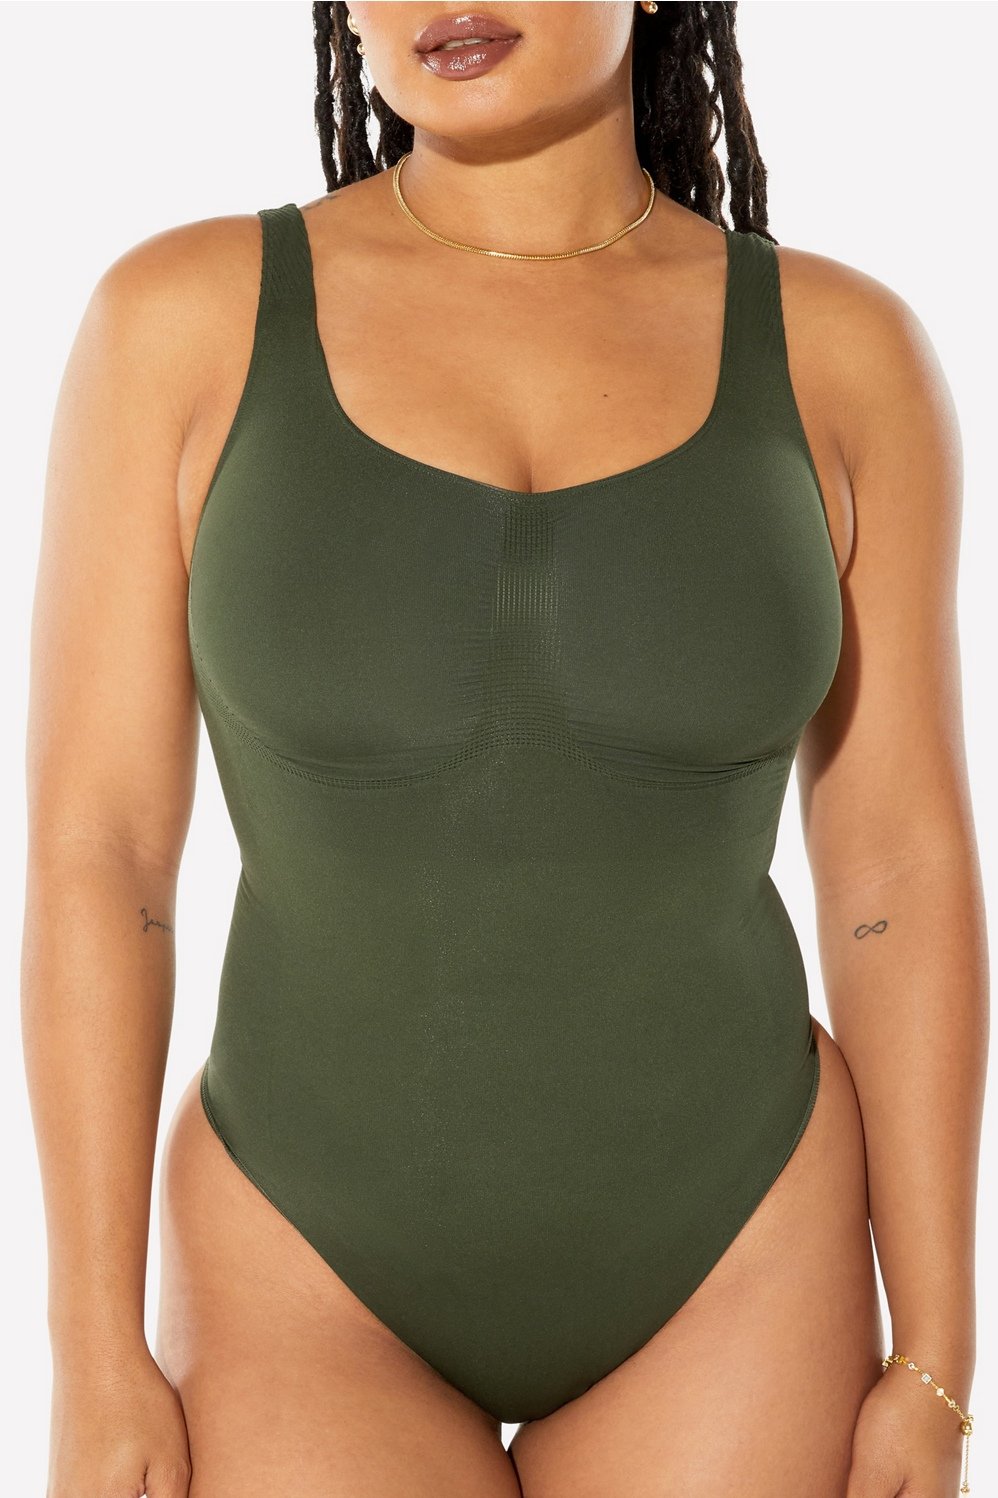 Thong bodysuit shapewear • Compare best prices now »